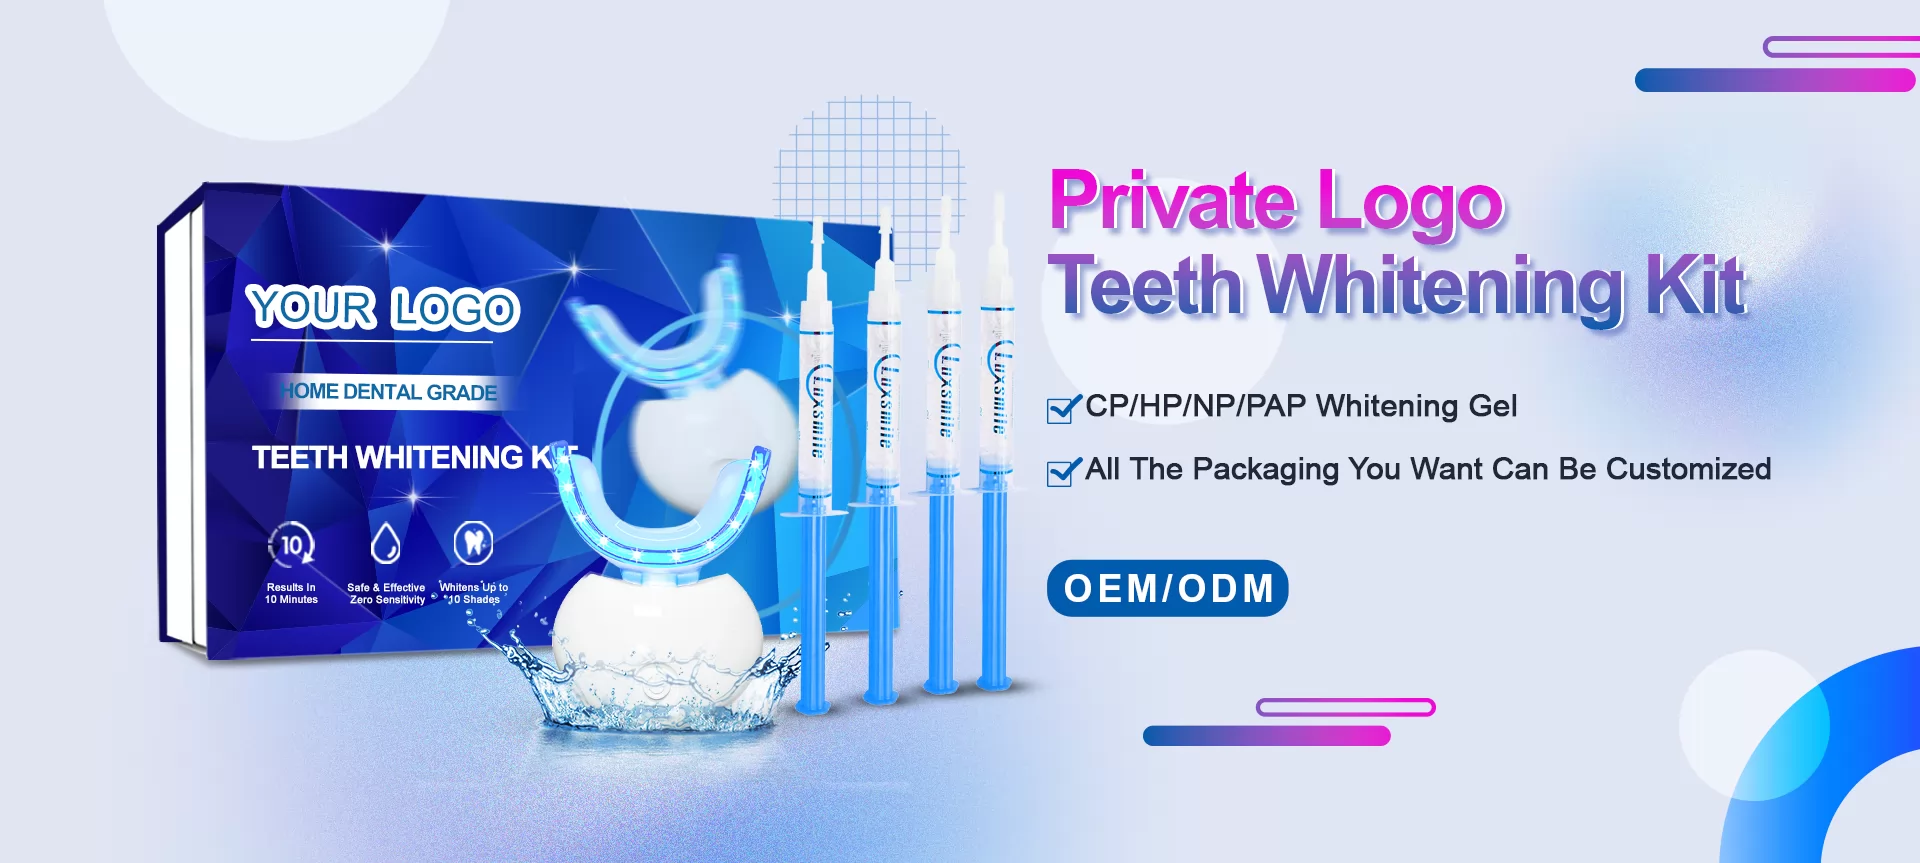 Customize the new trendy teeth whitening kit for your brand, start with Huaer Dental